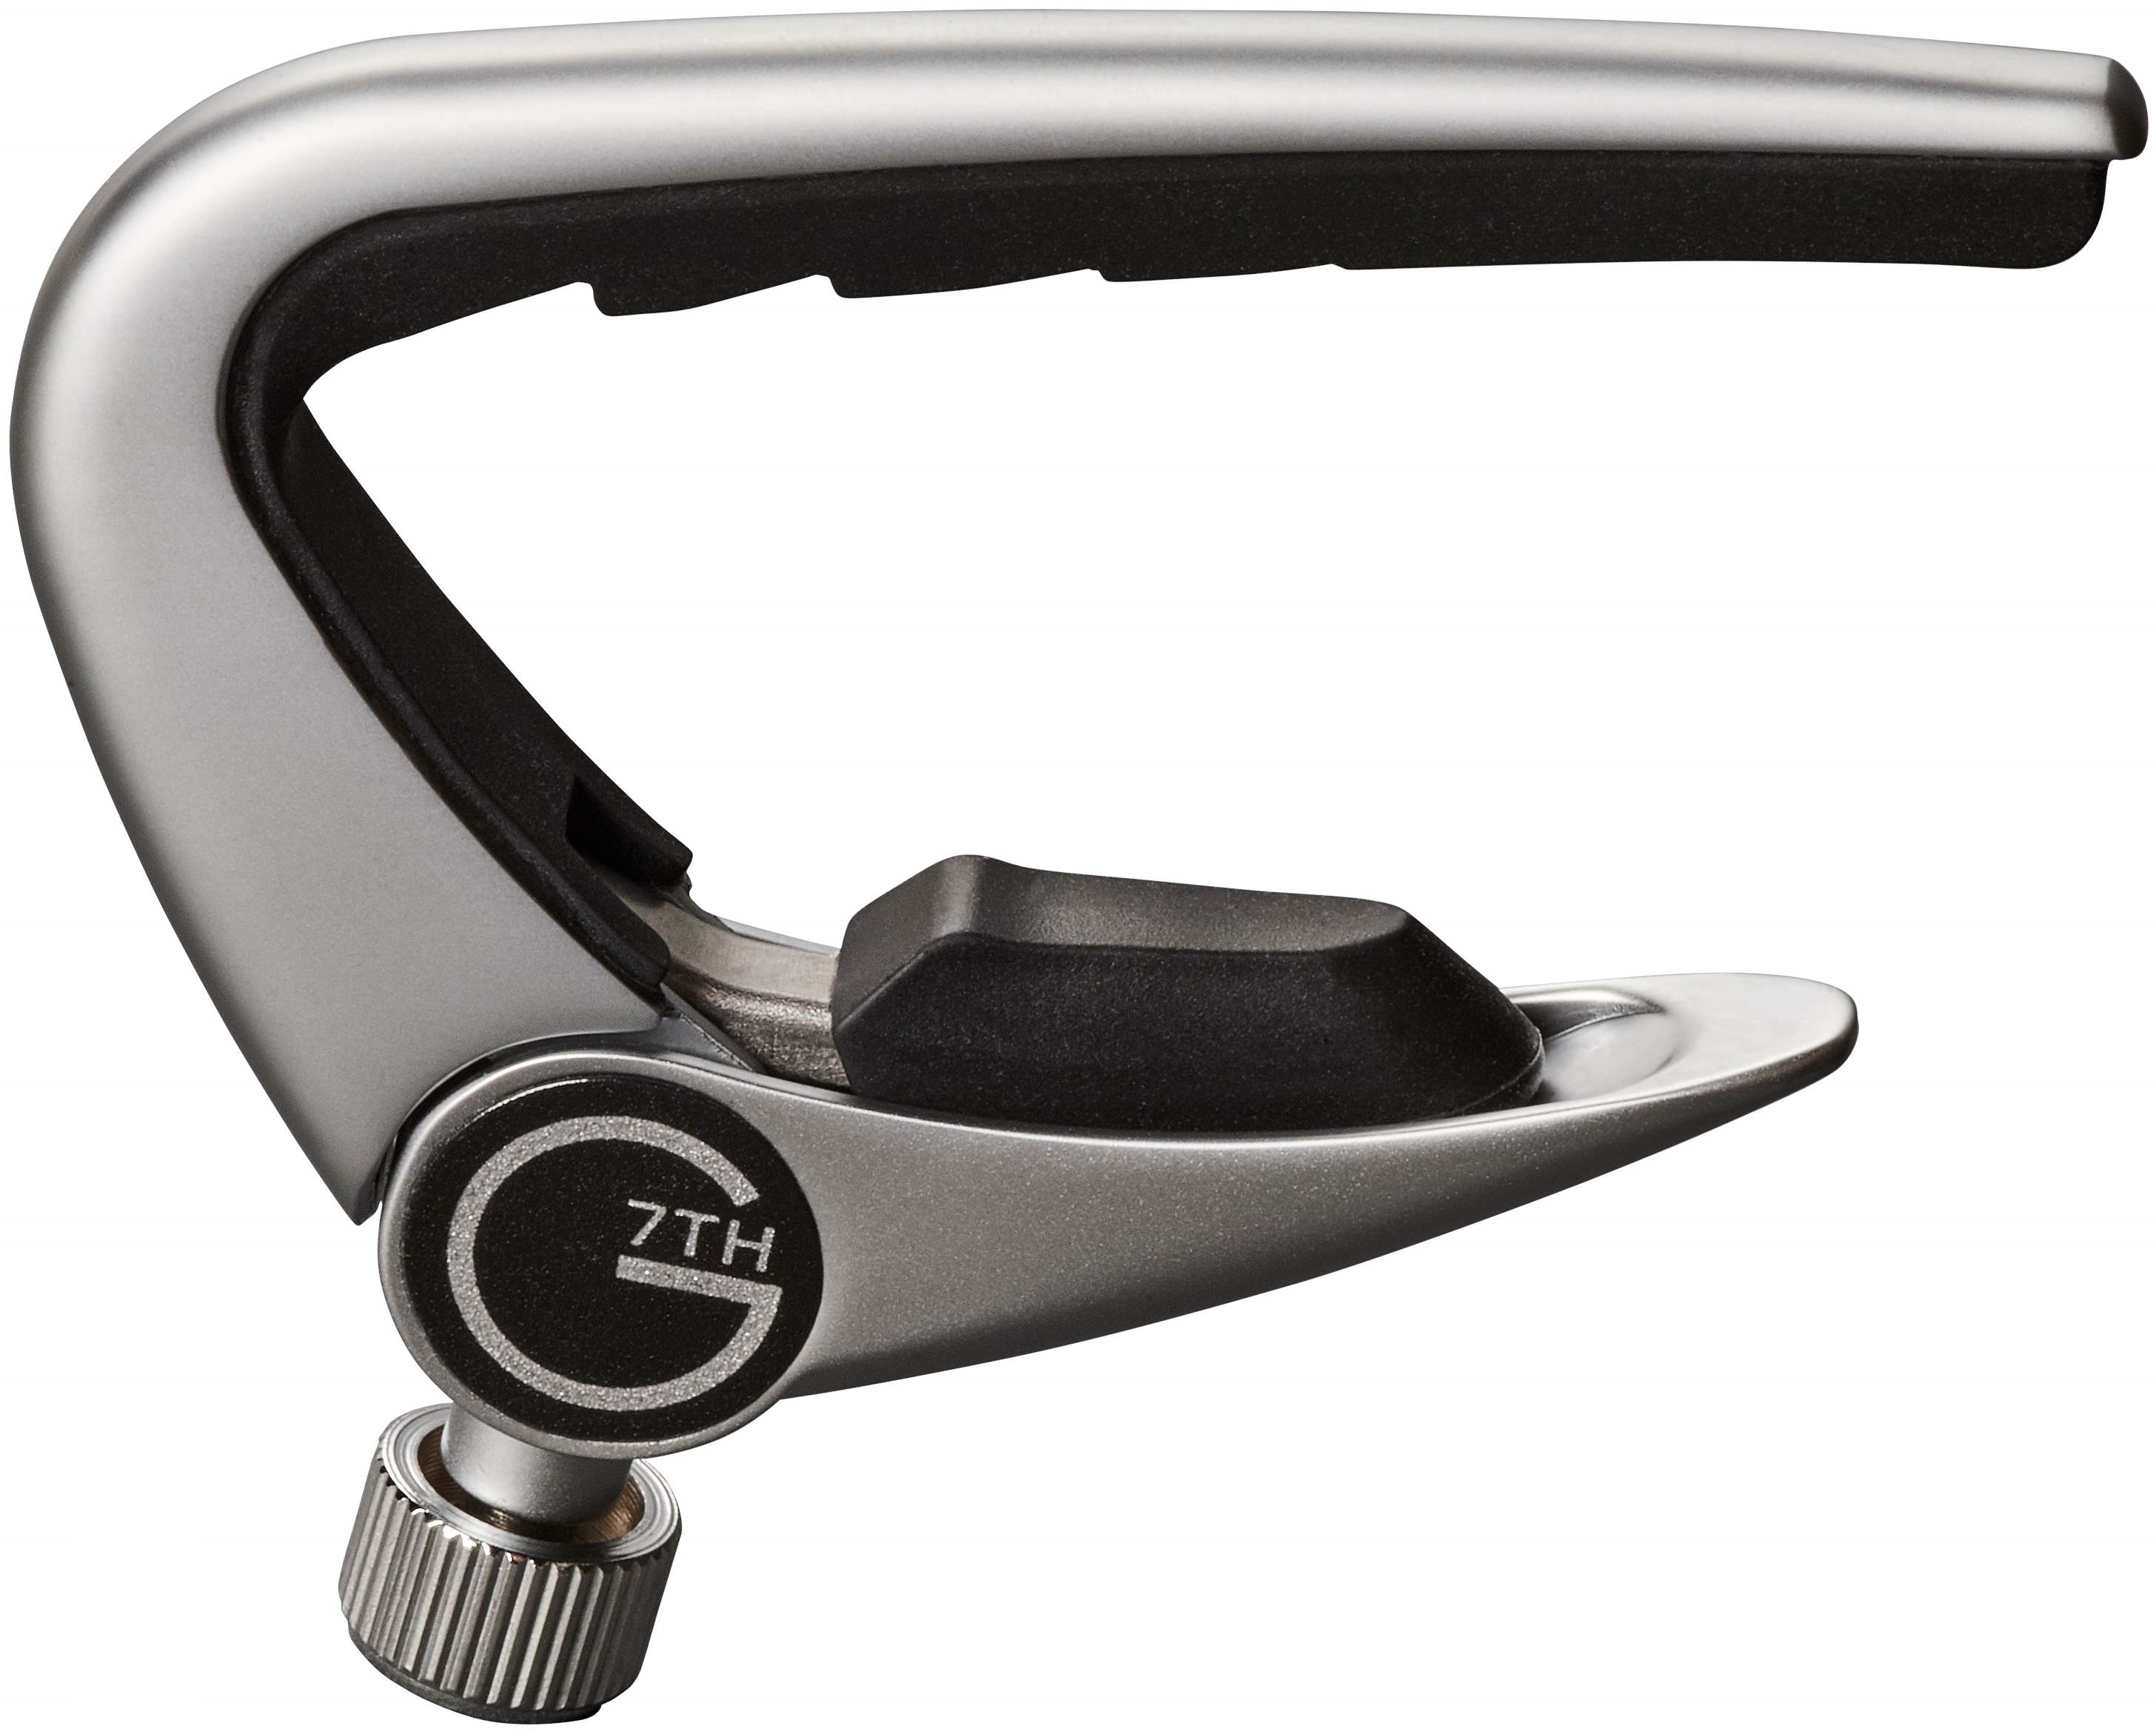 An image of G7th Newport 12 String Guitar Capo, Silver | PMT Online